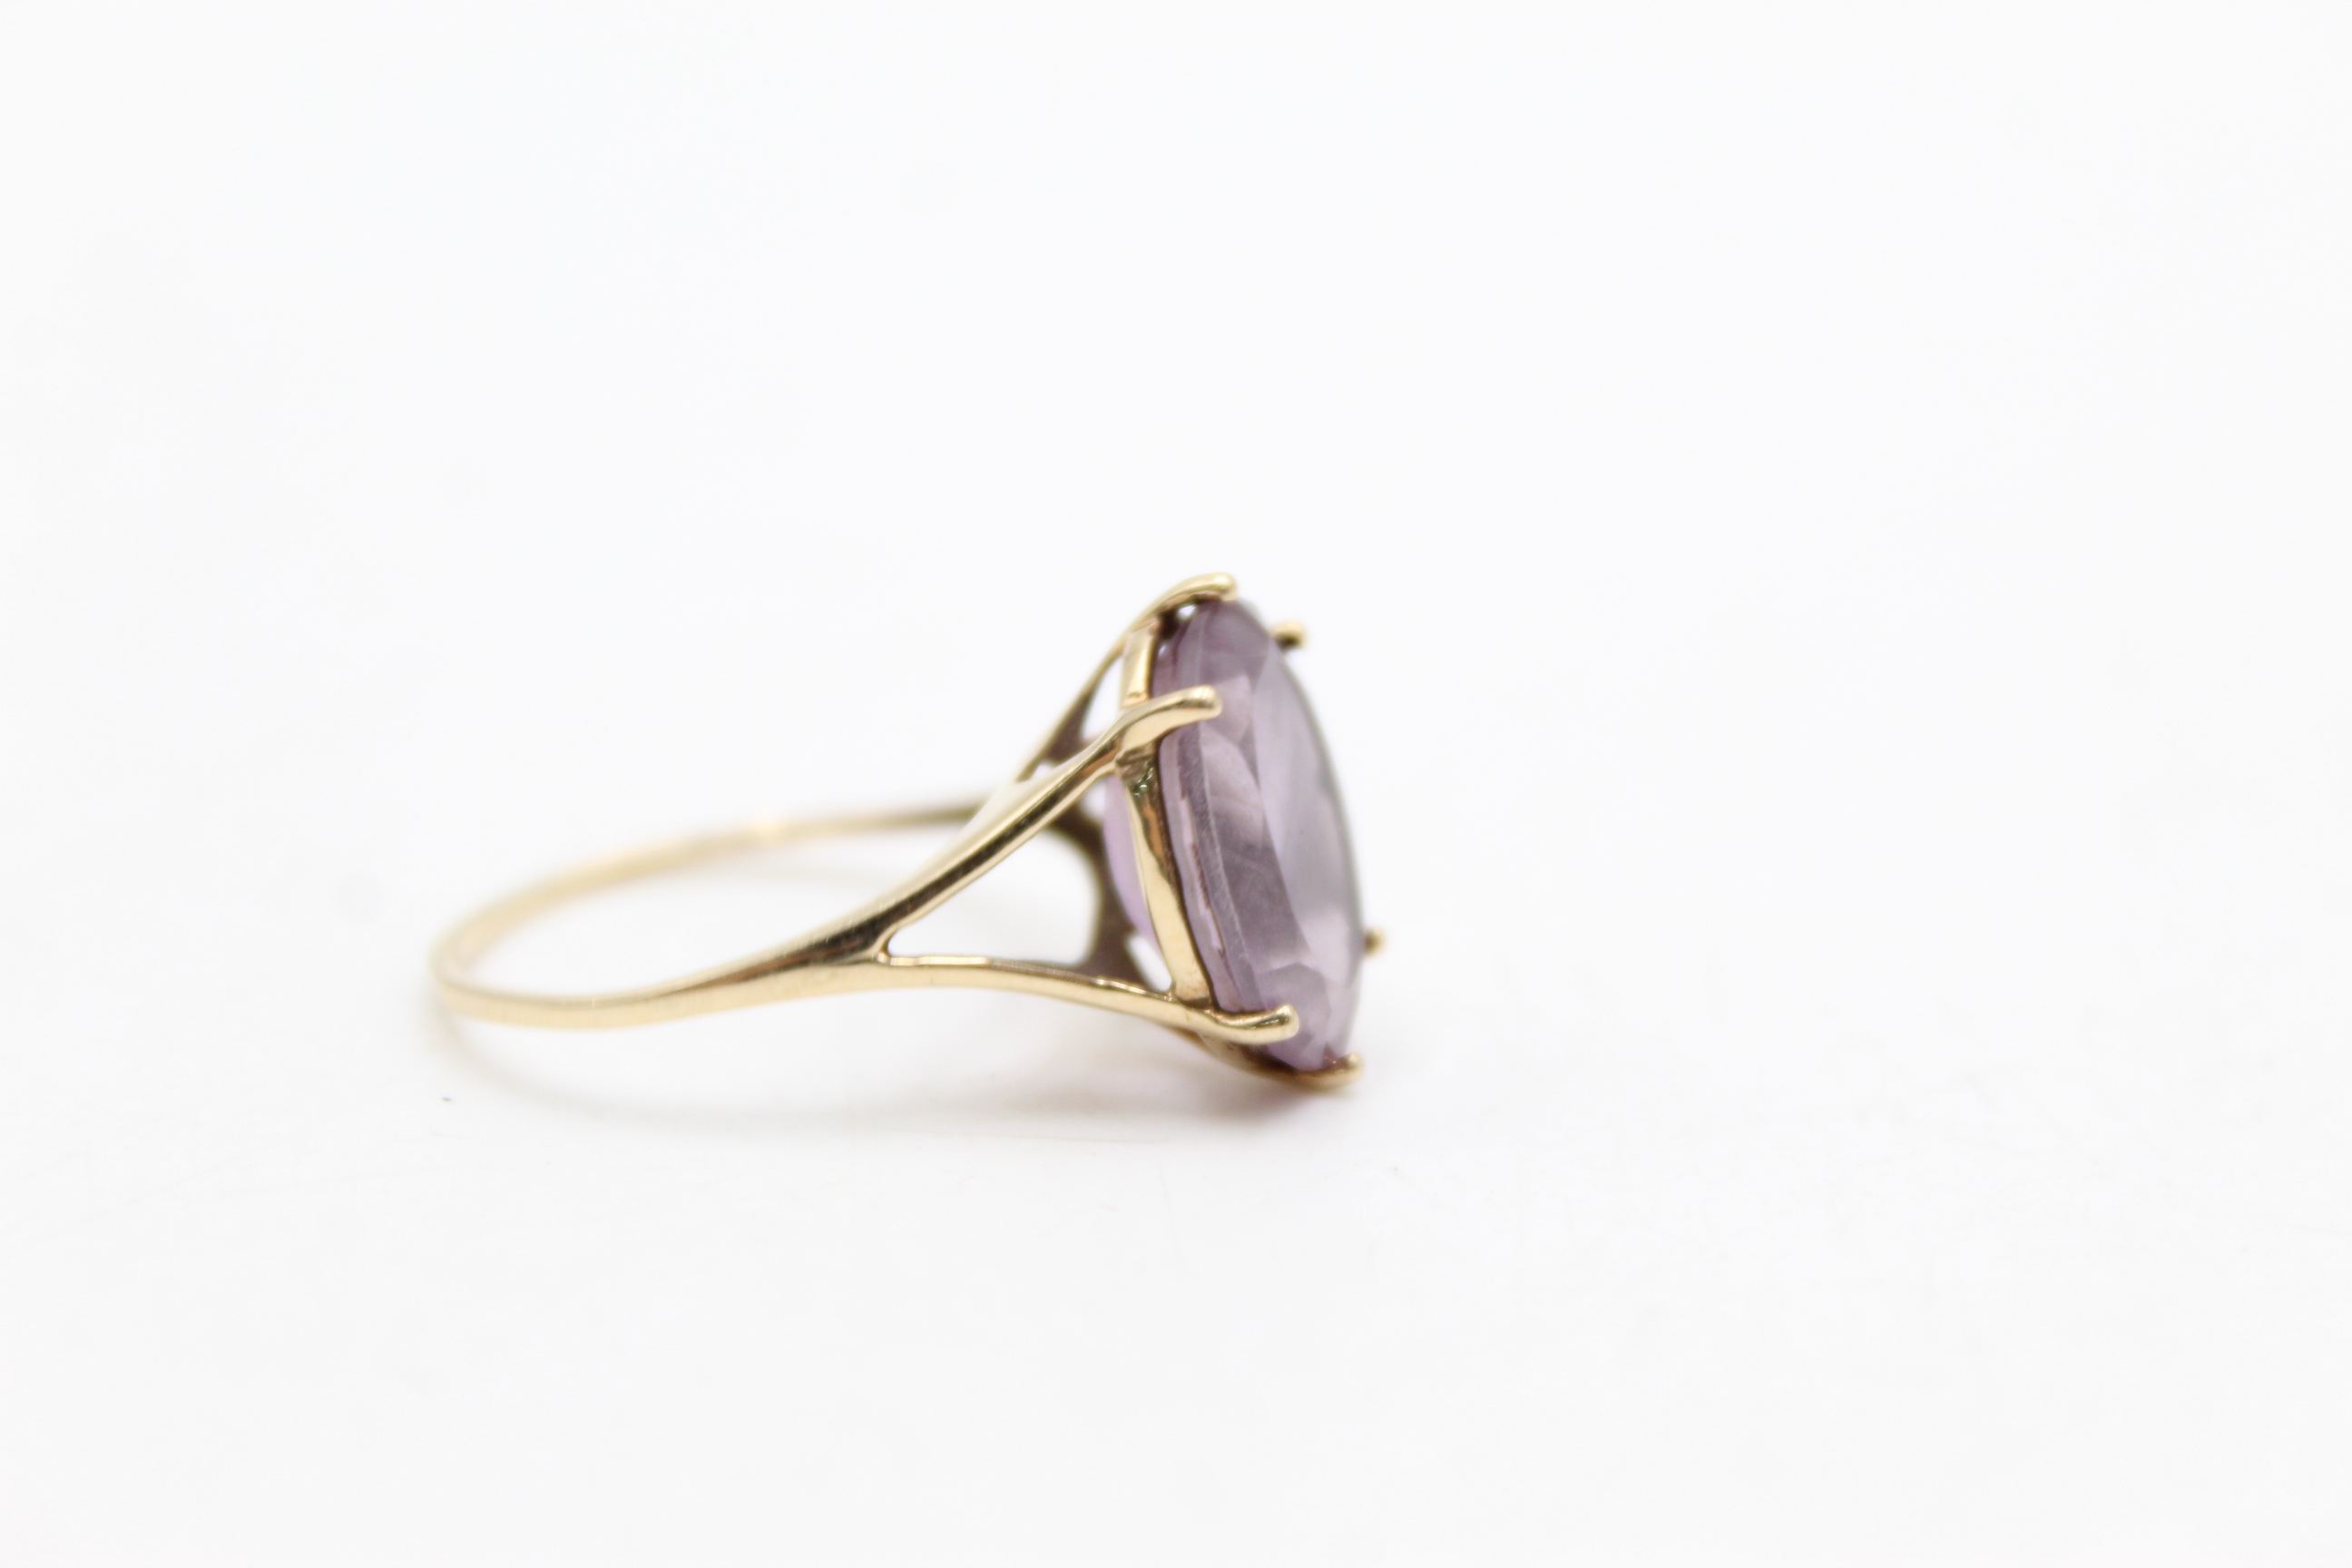 9ct gold amethyst solitaire dress ring (2.6g) - Image 2 of 7